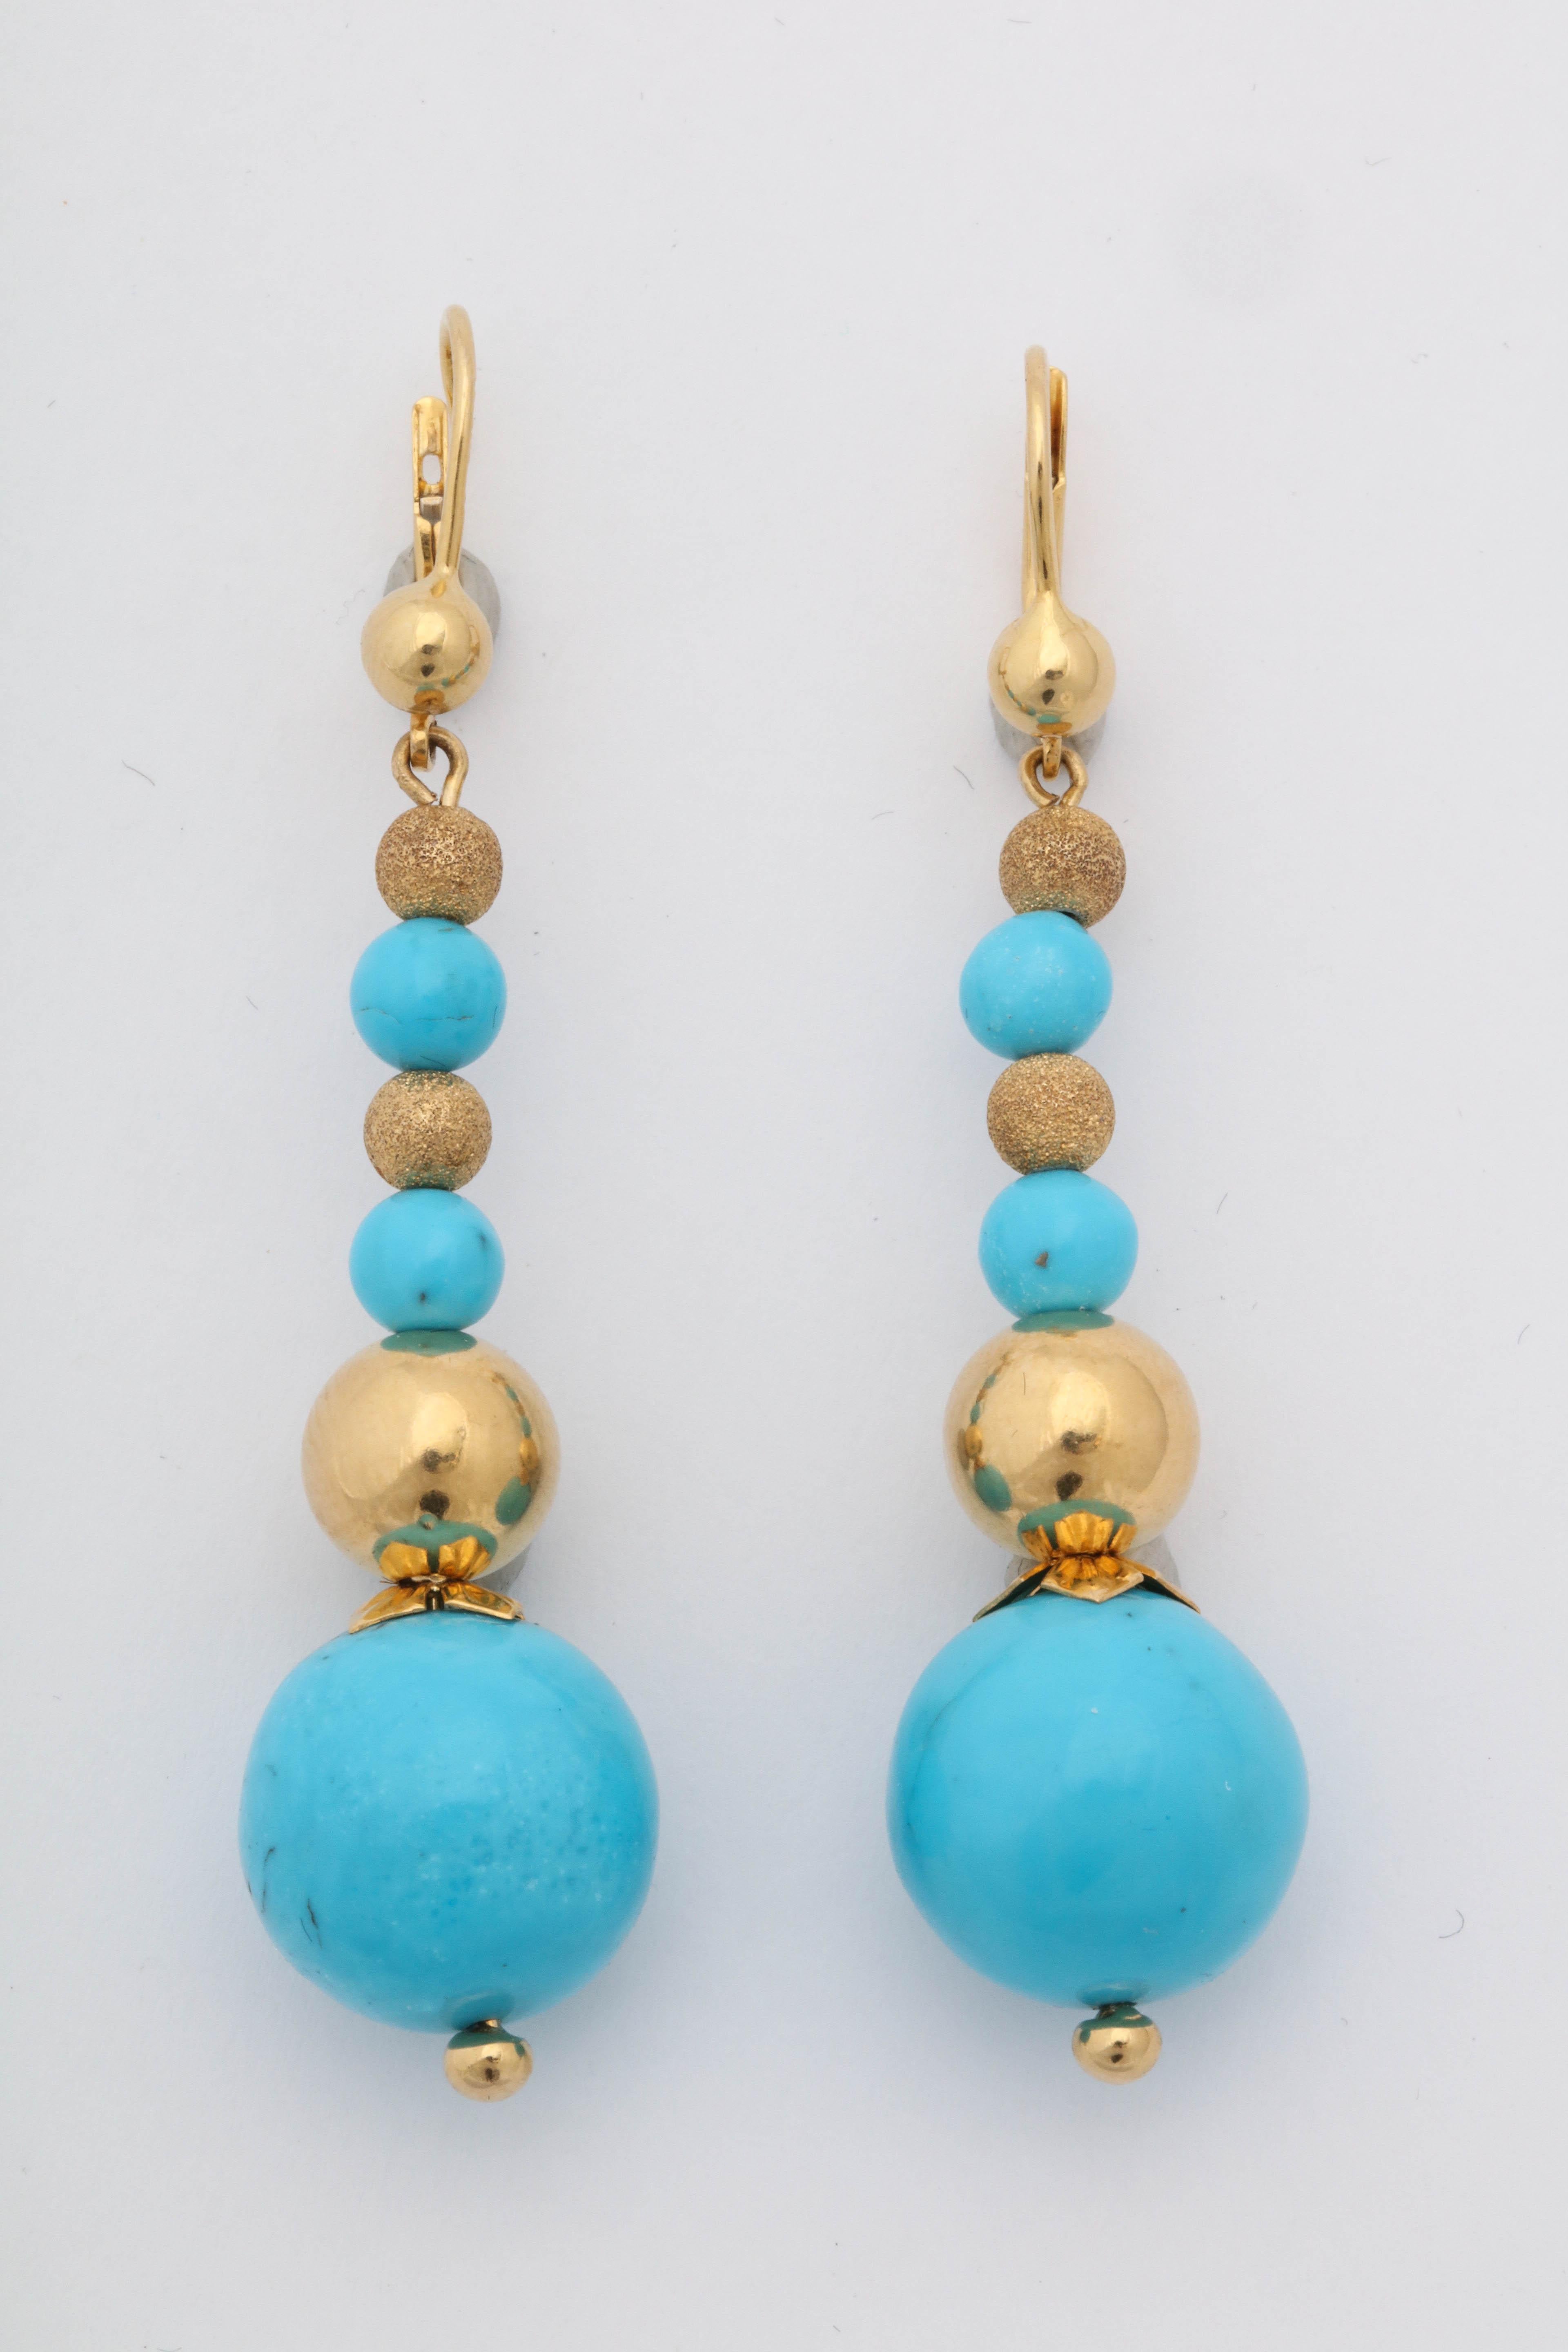 One Pair Of Ladies 14kt High Polish Gold And Goldstone Sparkly Gold Balls,Separated By Six Large Smooth Turquoise Balls.Created In Italy In The 1980's.